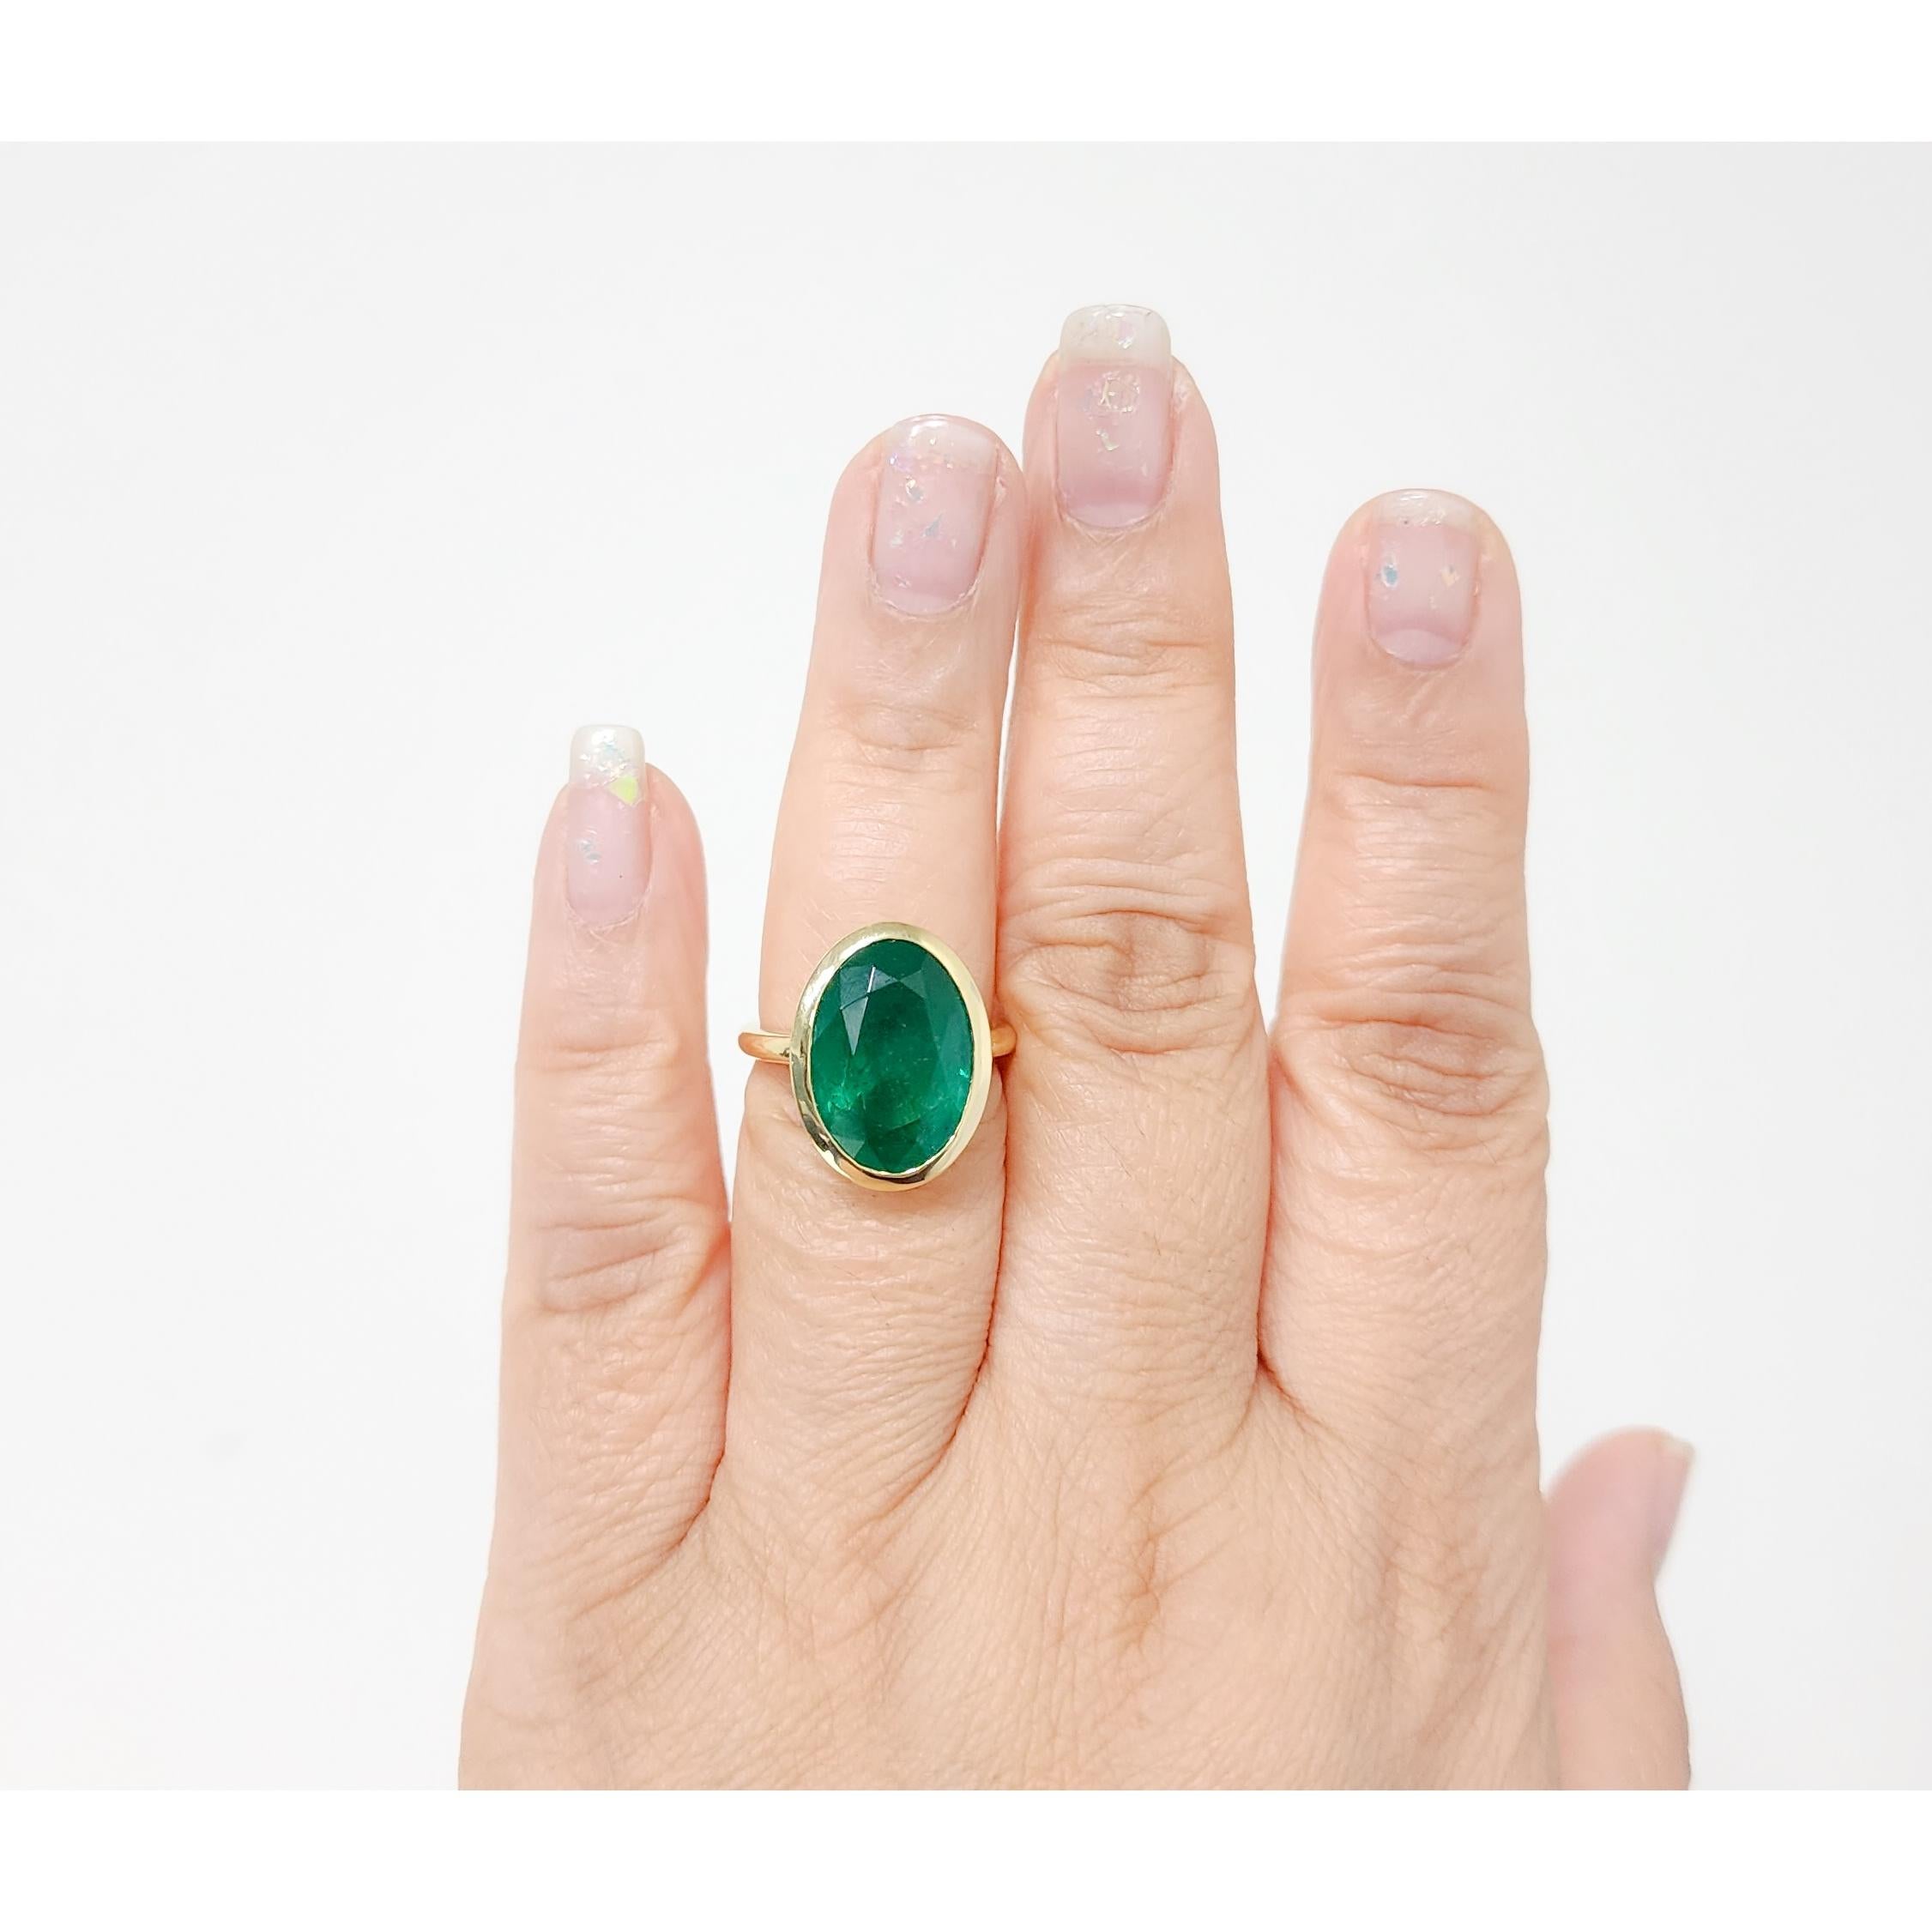 Beautiful 10.97 ct. emerald oval in a handmade 18k yellow gold bezel ring.  Ring size 7.